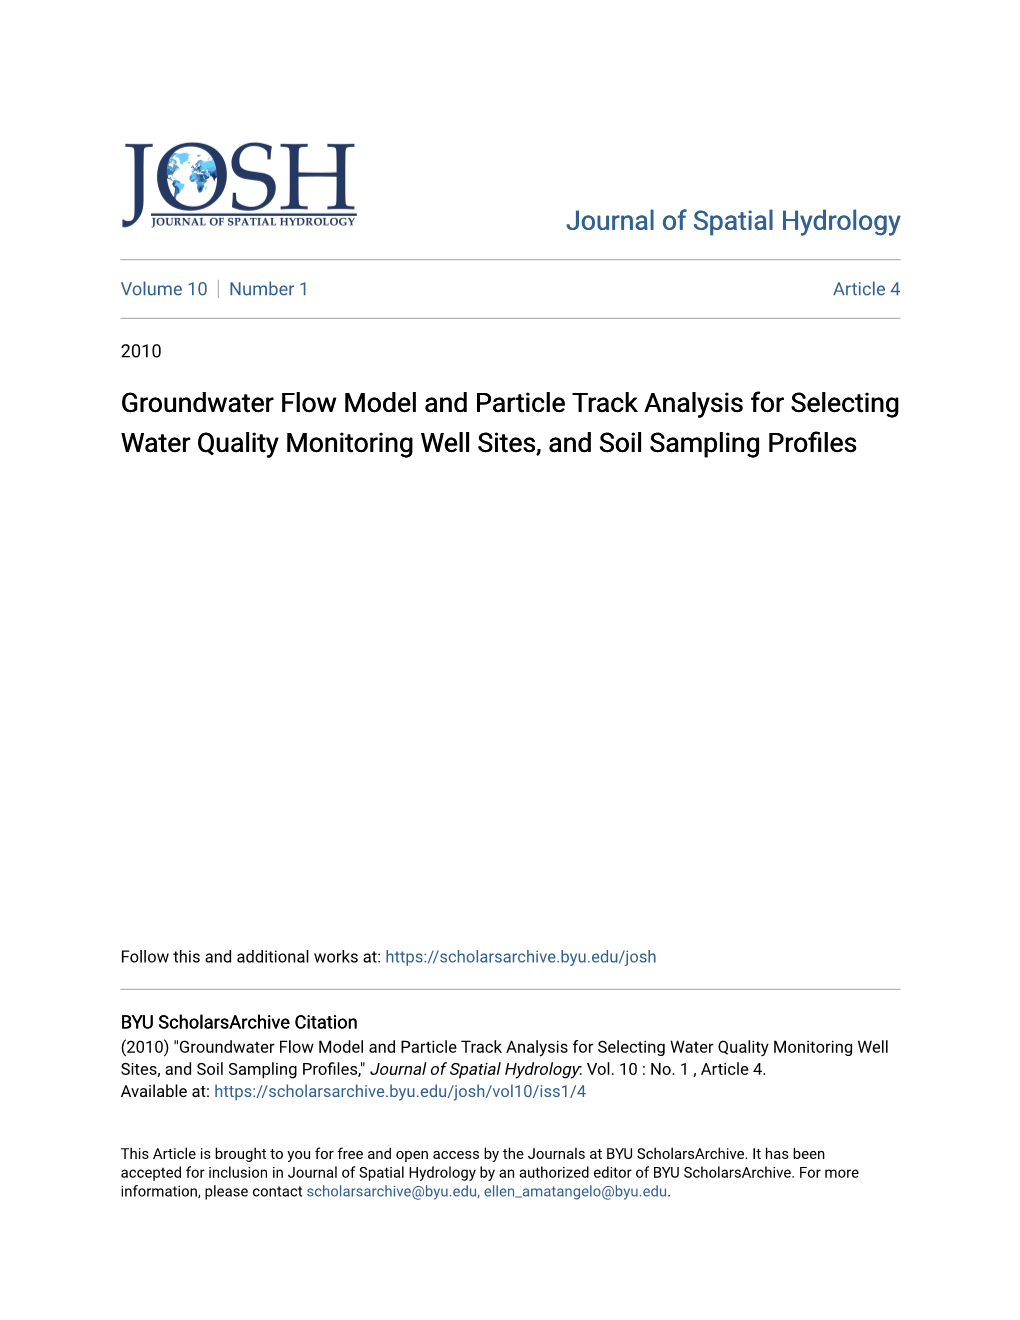 Groundwater Flow Model and Particle Track Analysis for Selecting Water Quality Monitoring Well Sites, and Soil Sampling Profiles